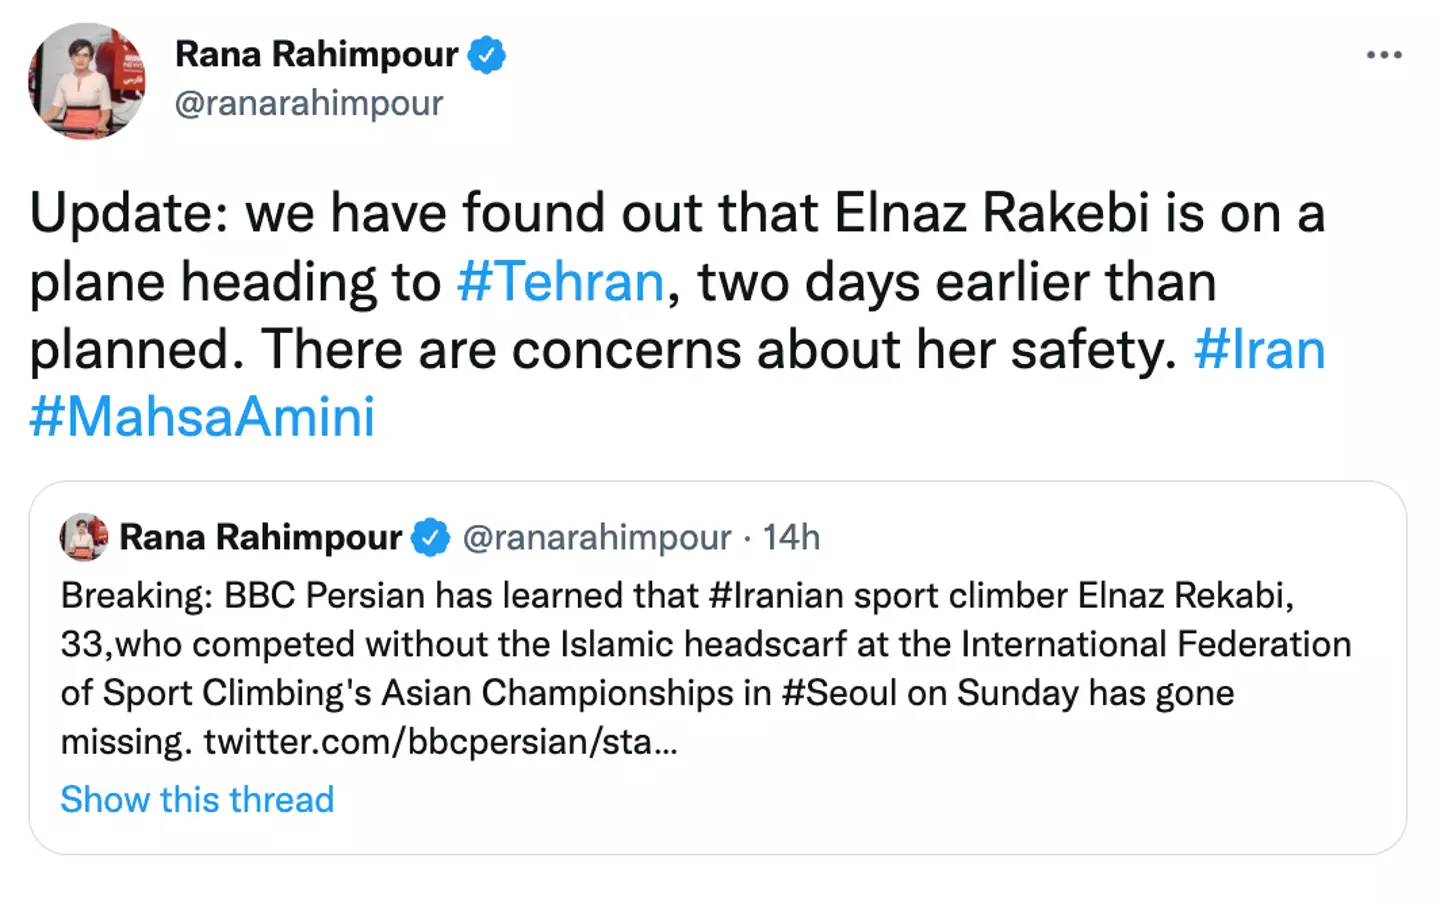 Rekabi is said to be returning to Iran following the event.